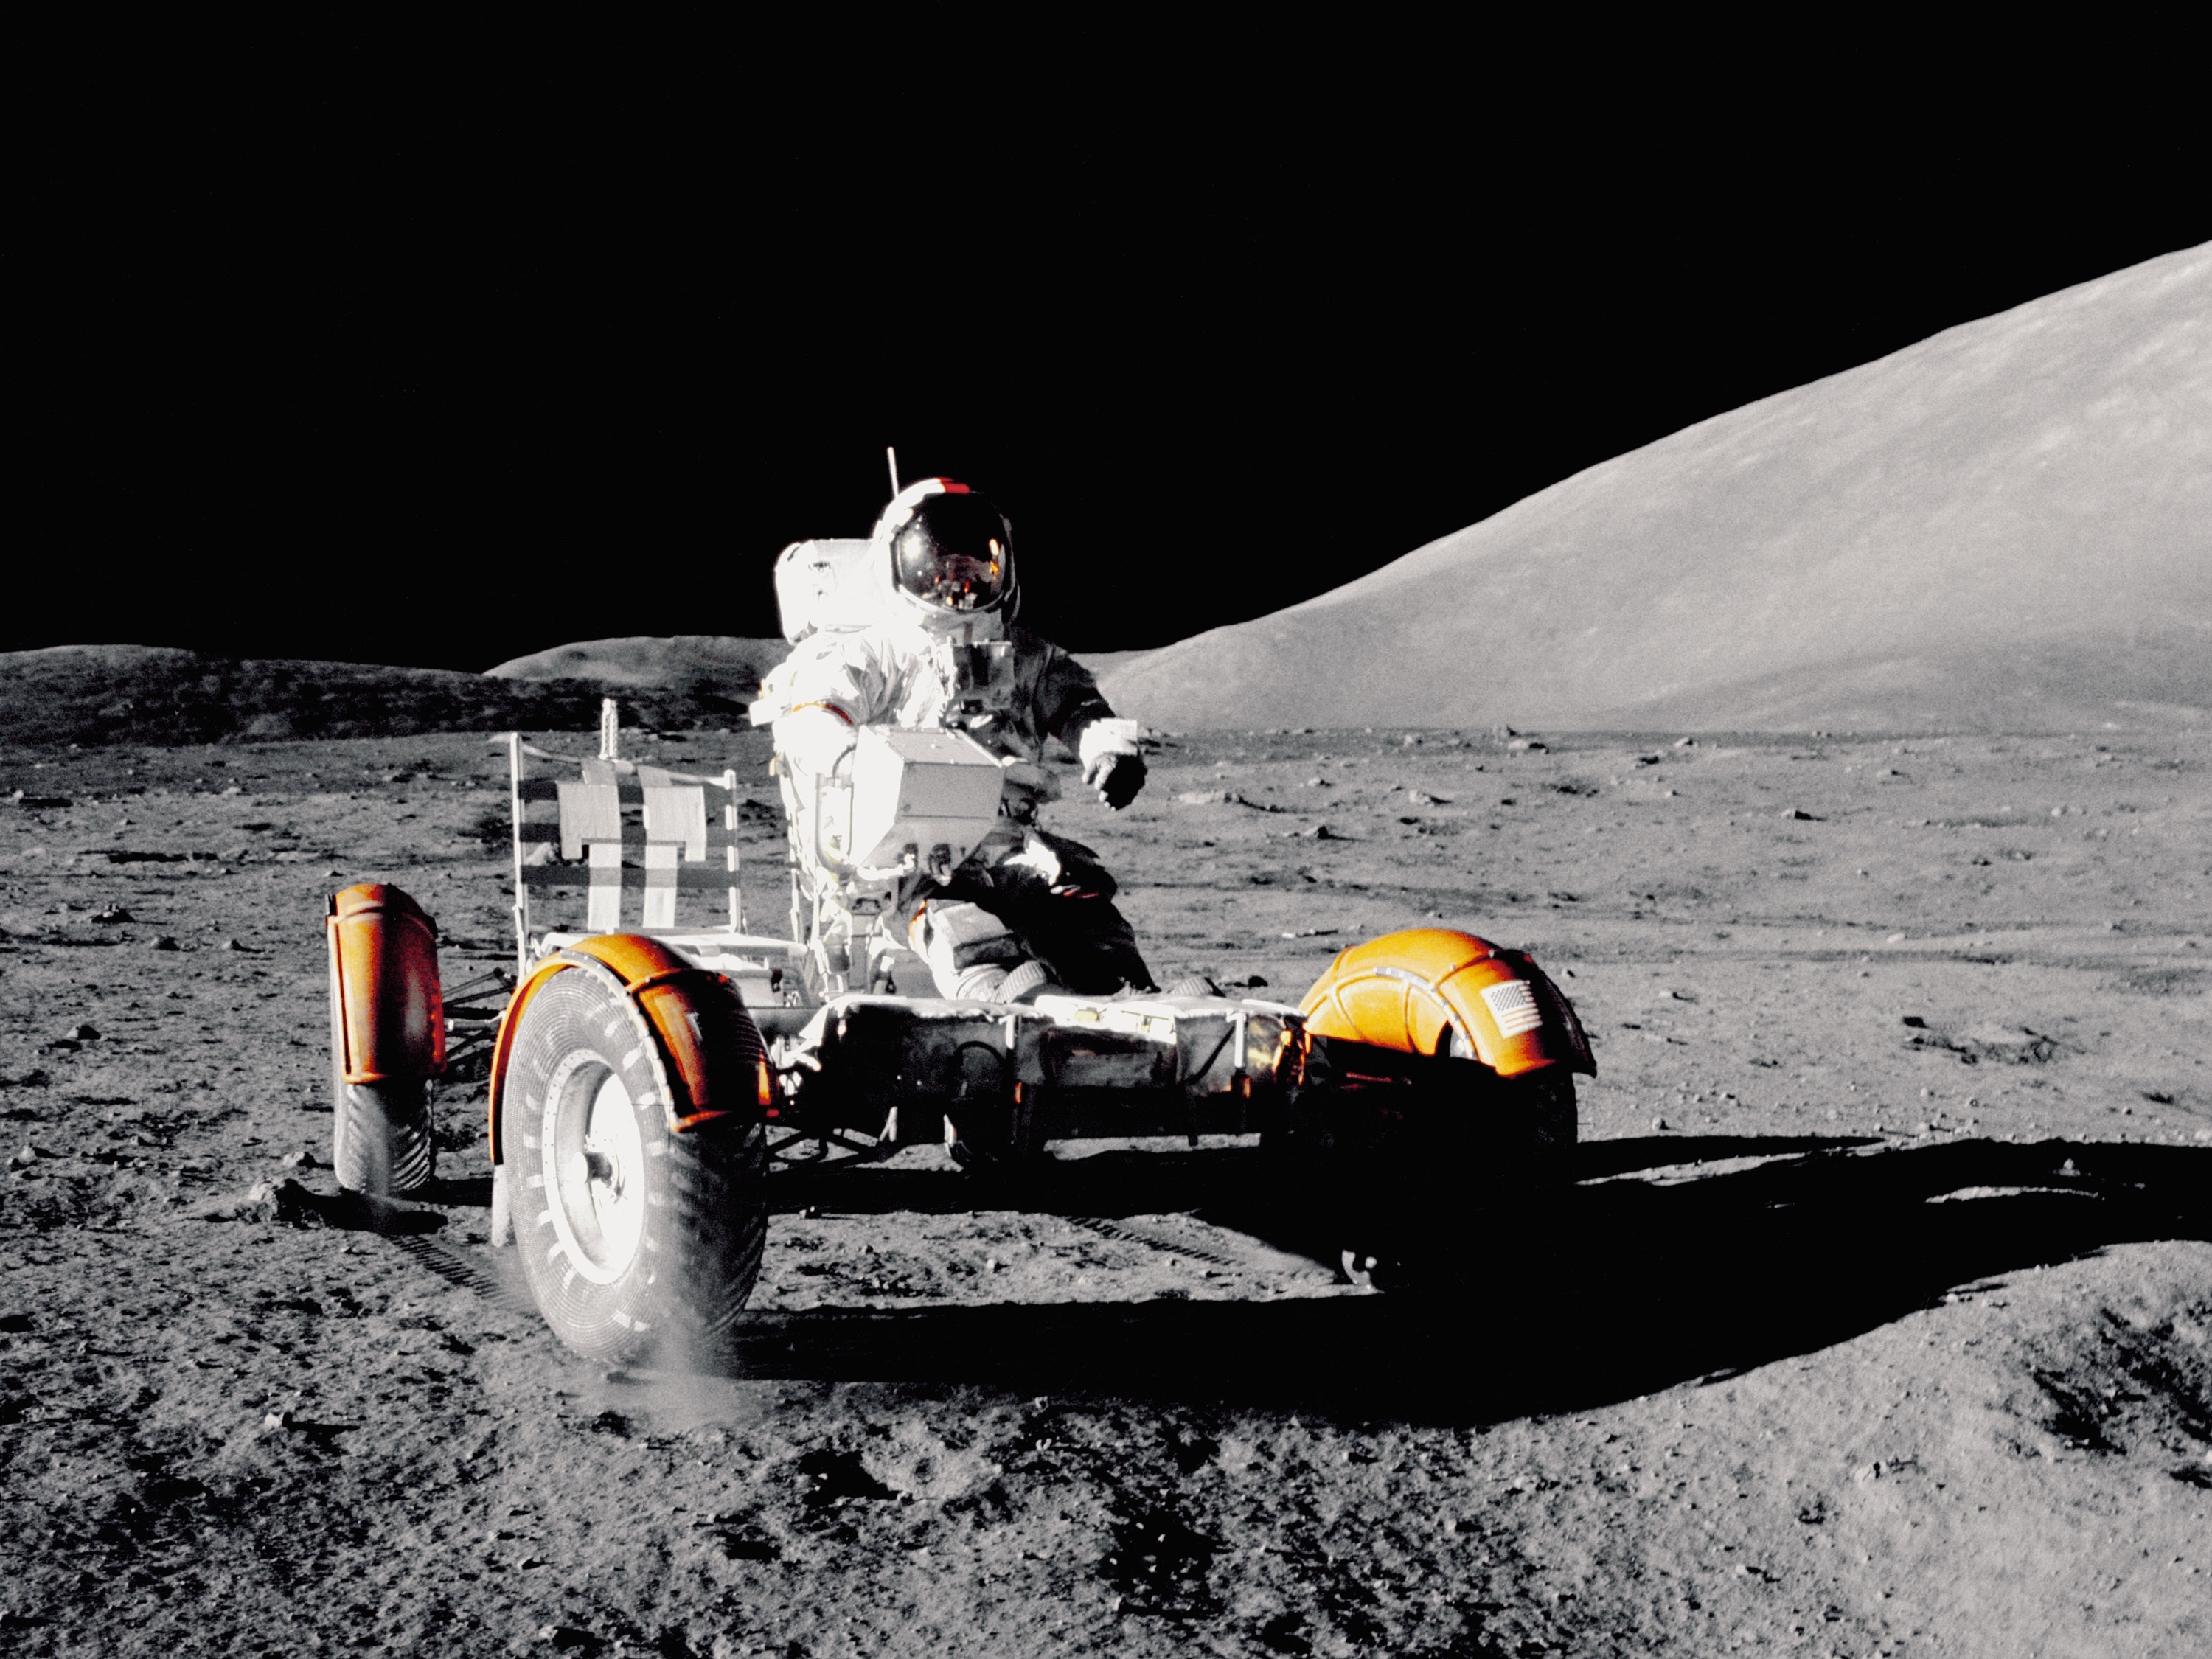 Helping create products for successful missions to the moon